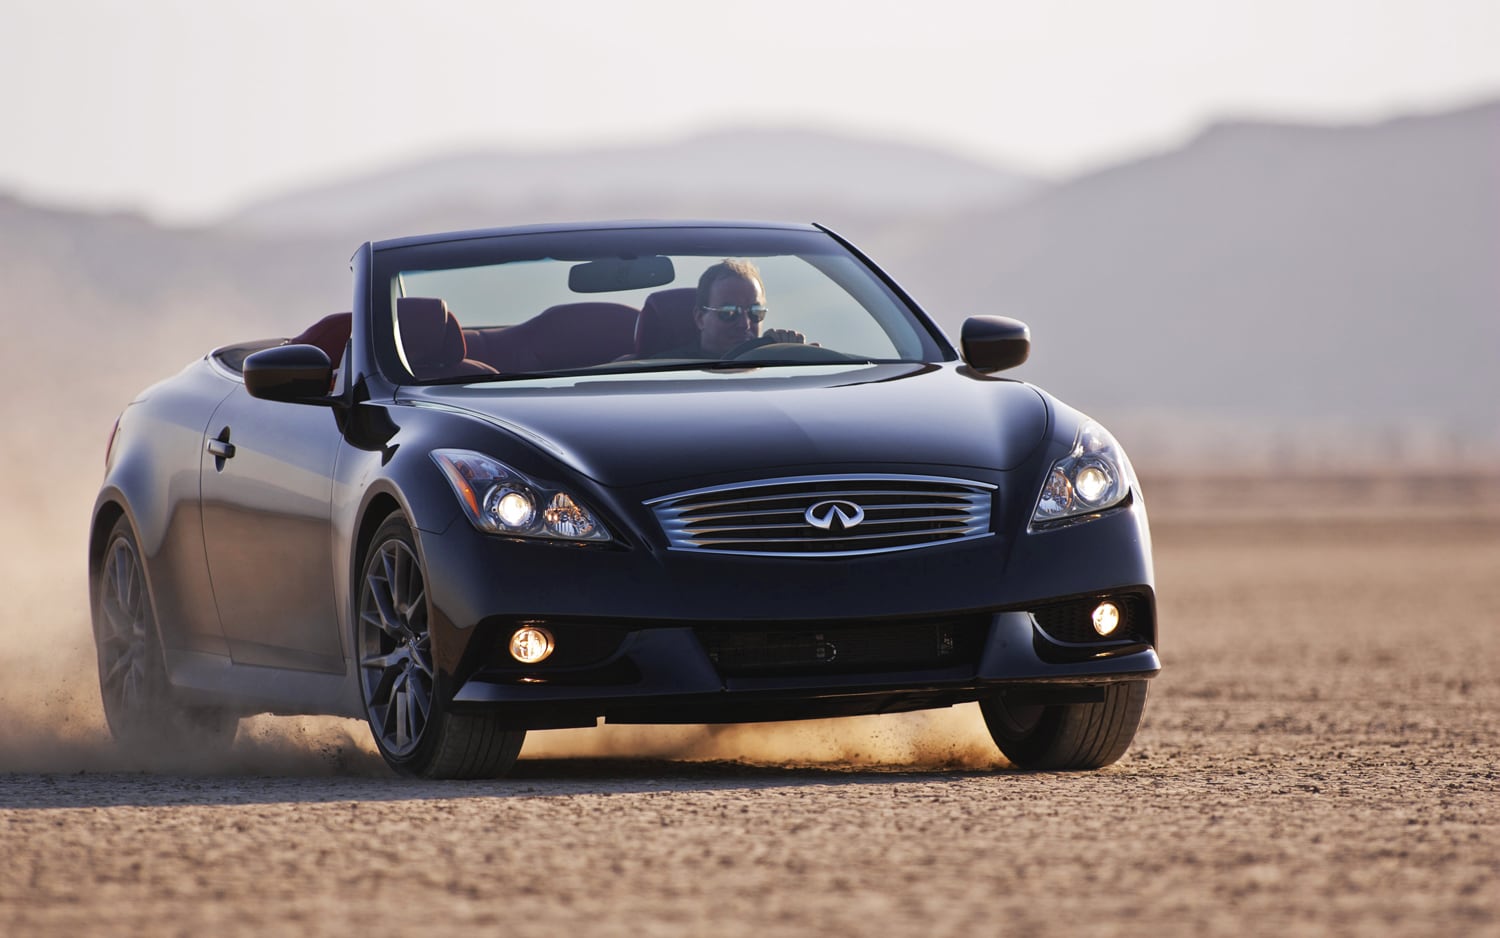 Priced: 2013 Infiniti G Coupe, Convertible - IPL G Convertible Costs $61,495